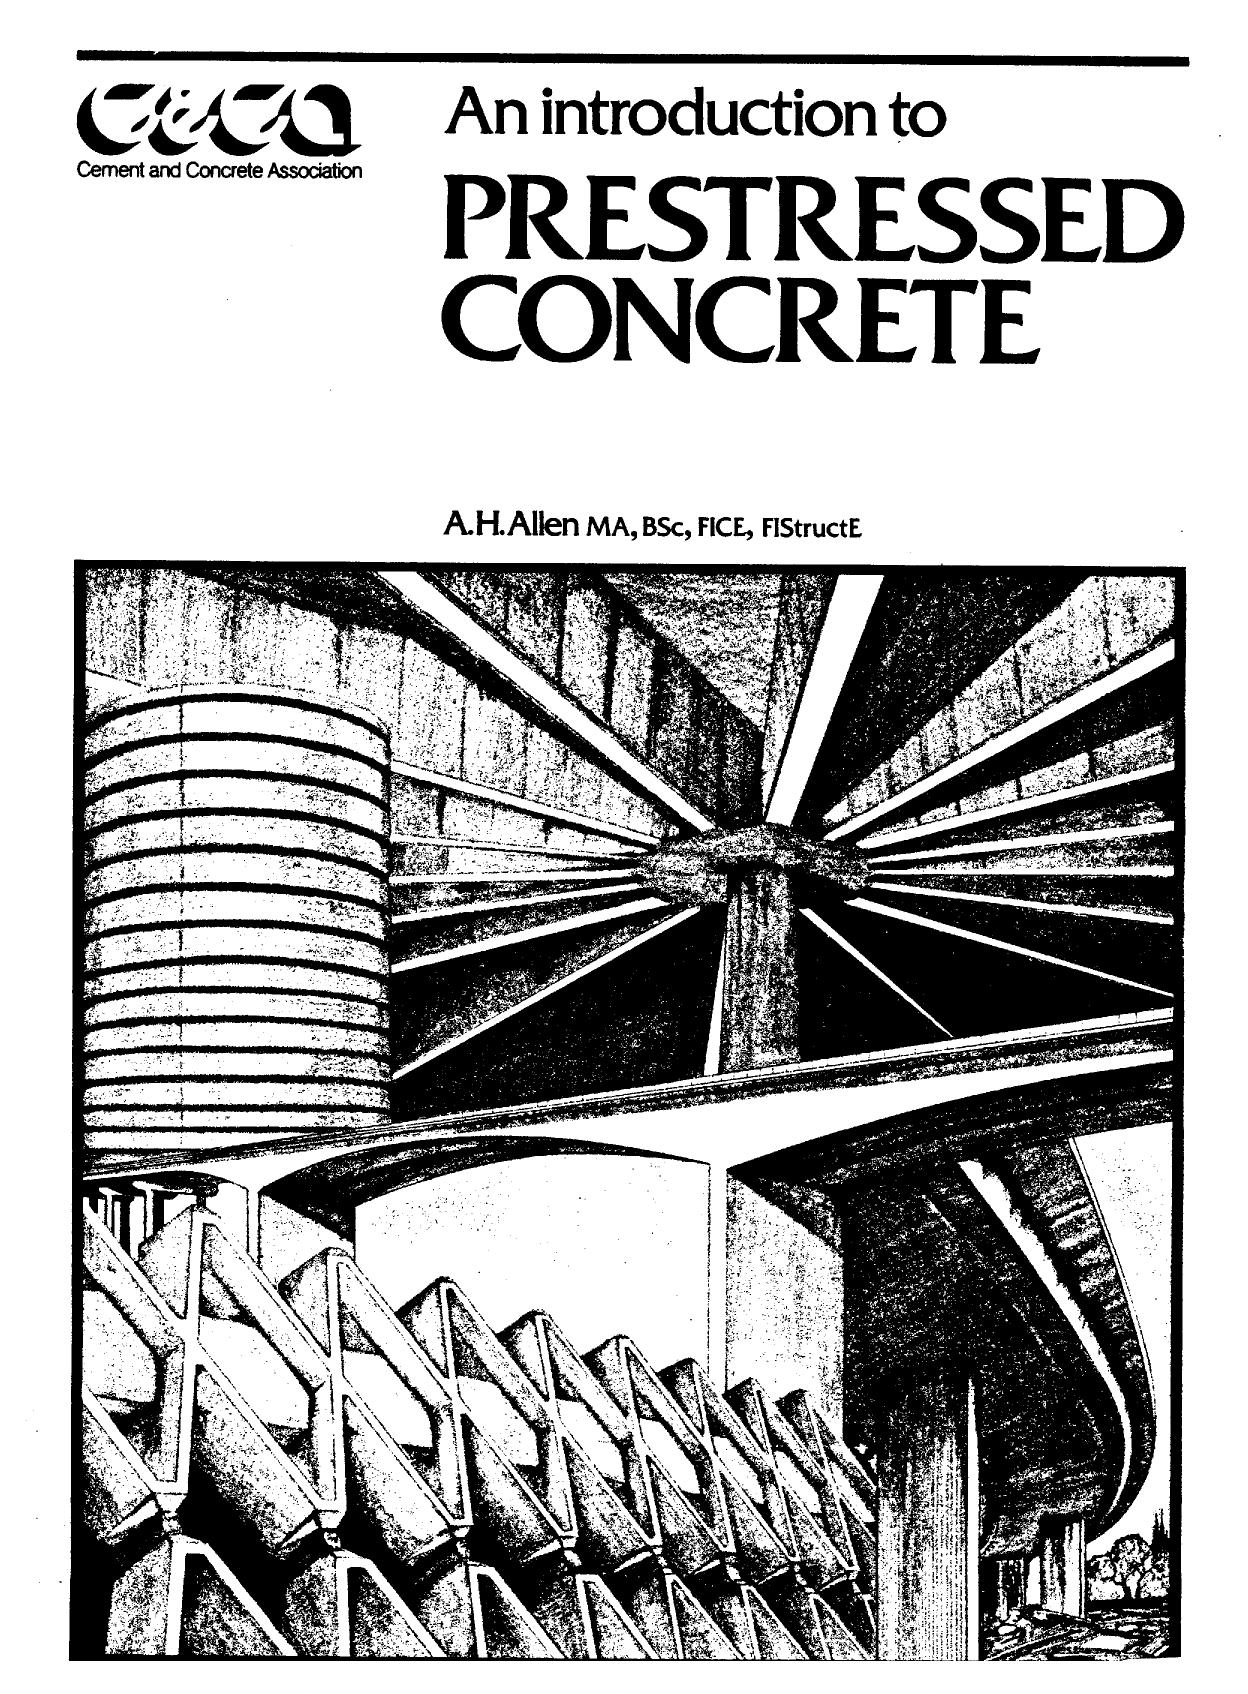 Introduction to prestressed concrete